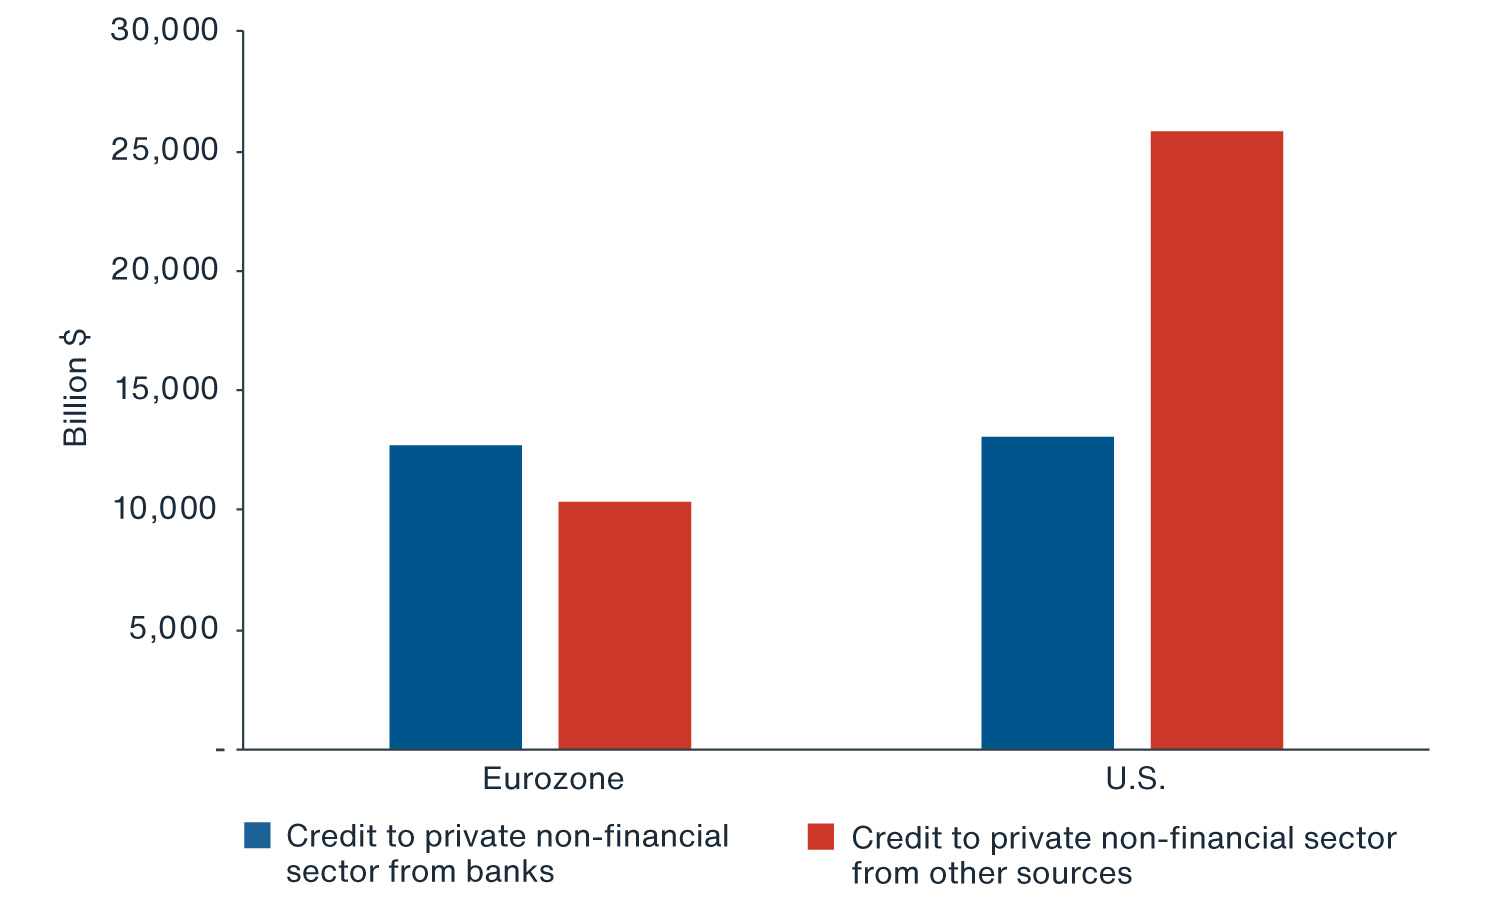 Chart showing European corporates are traditionally highly reliant on bank financing for their financing needs compared to U.S. 